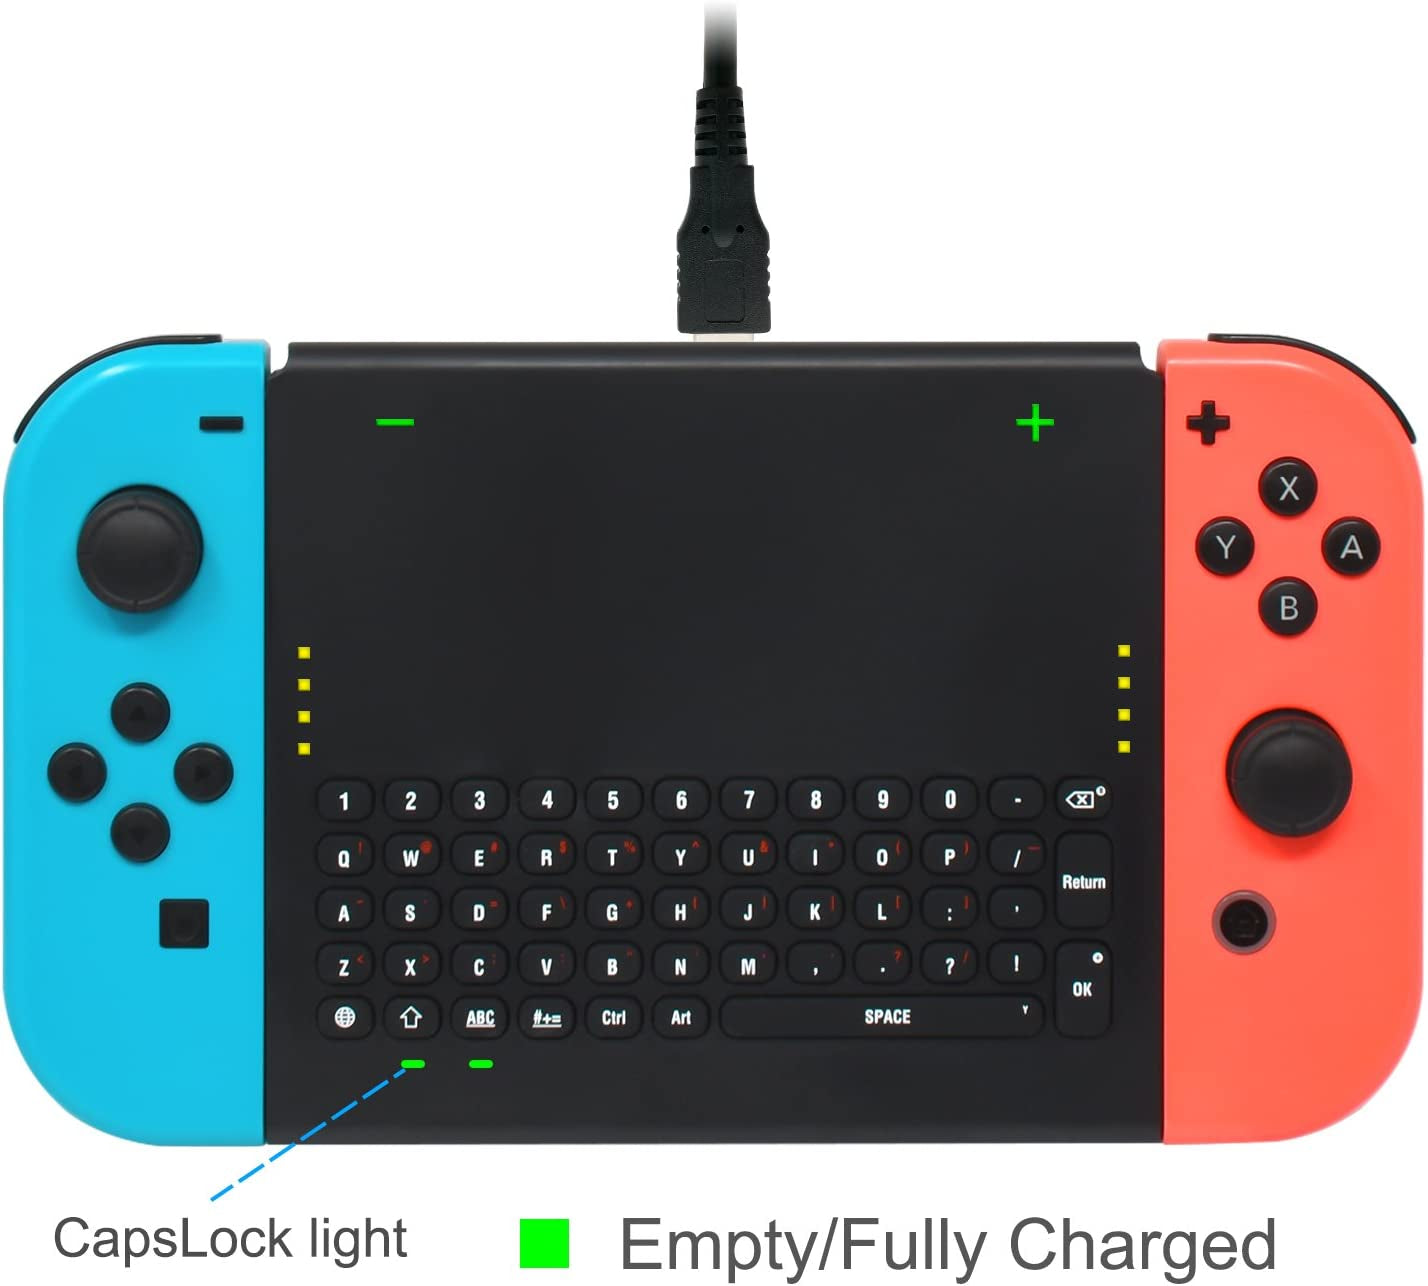 2.4G Wireless Keyboard with USB Receiver for Nintendo Switch/Switch OLED - Rechargeable Handheld Remote Control Gamepad Chatpad Message Keyboard